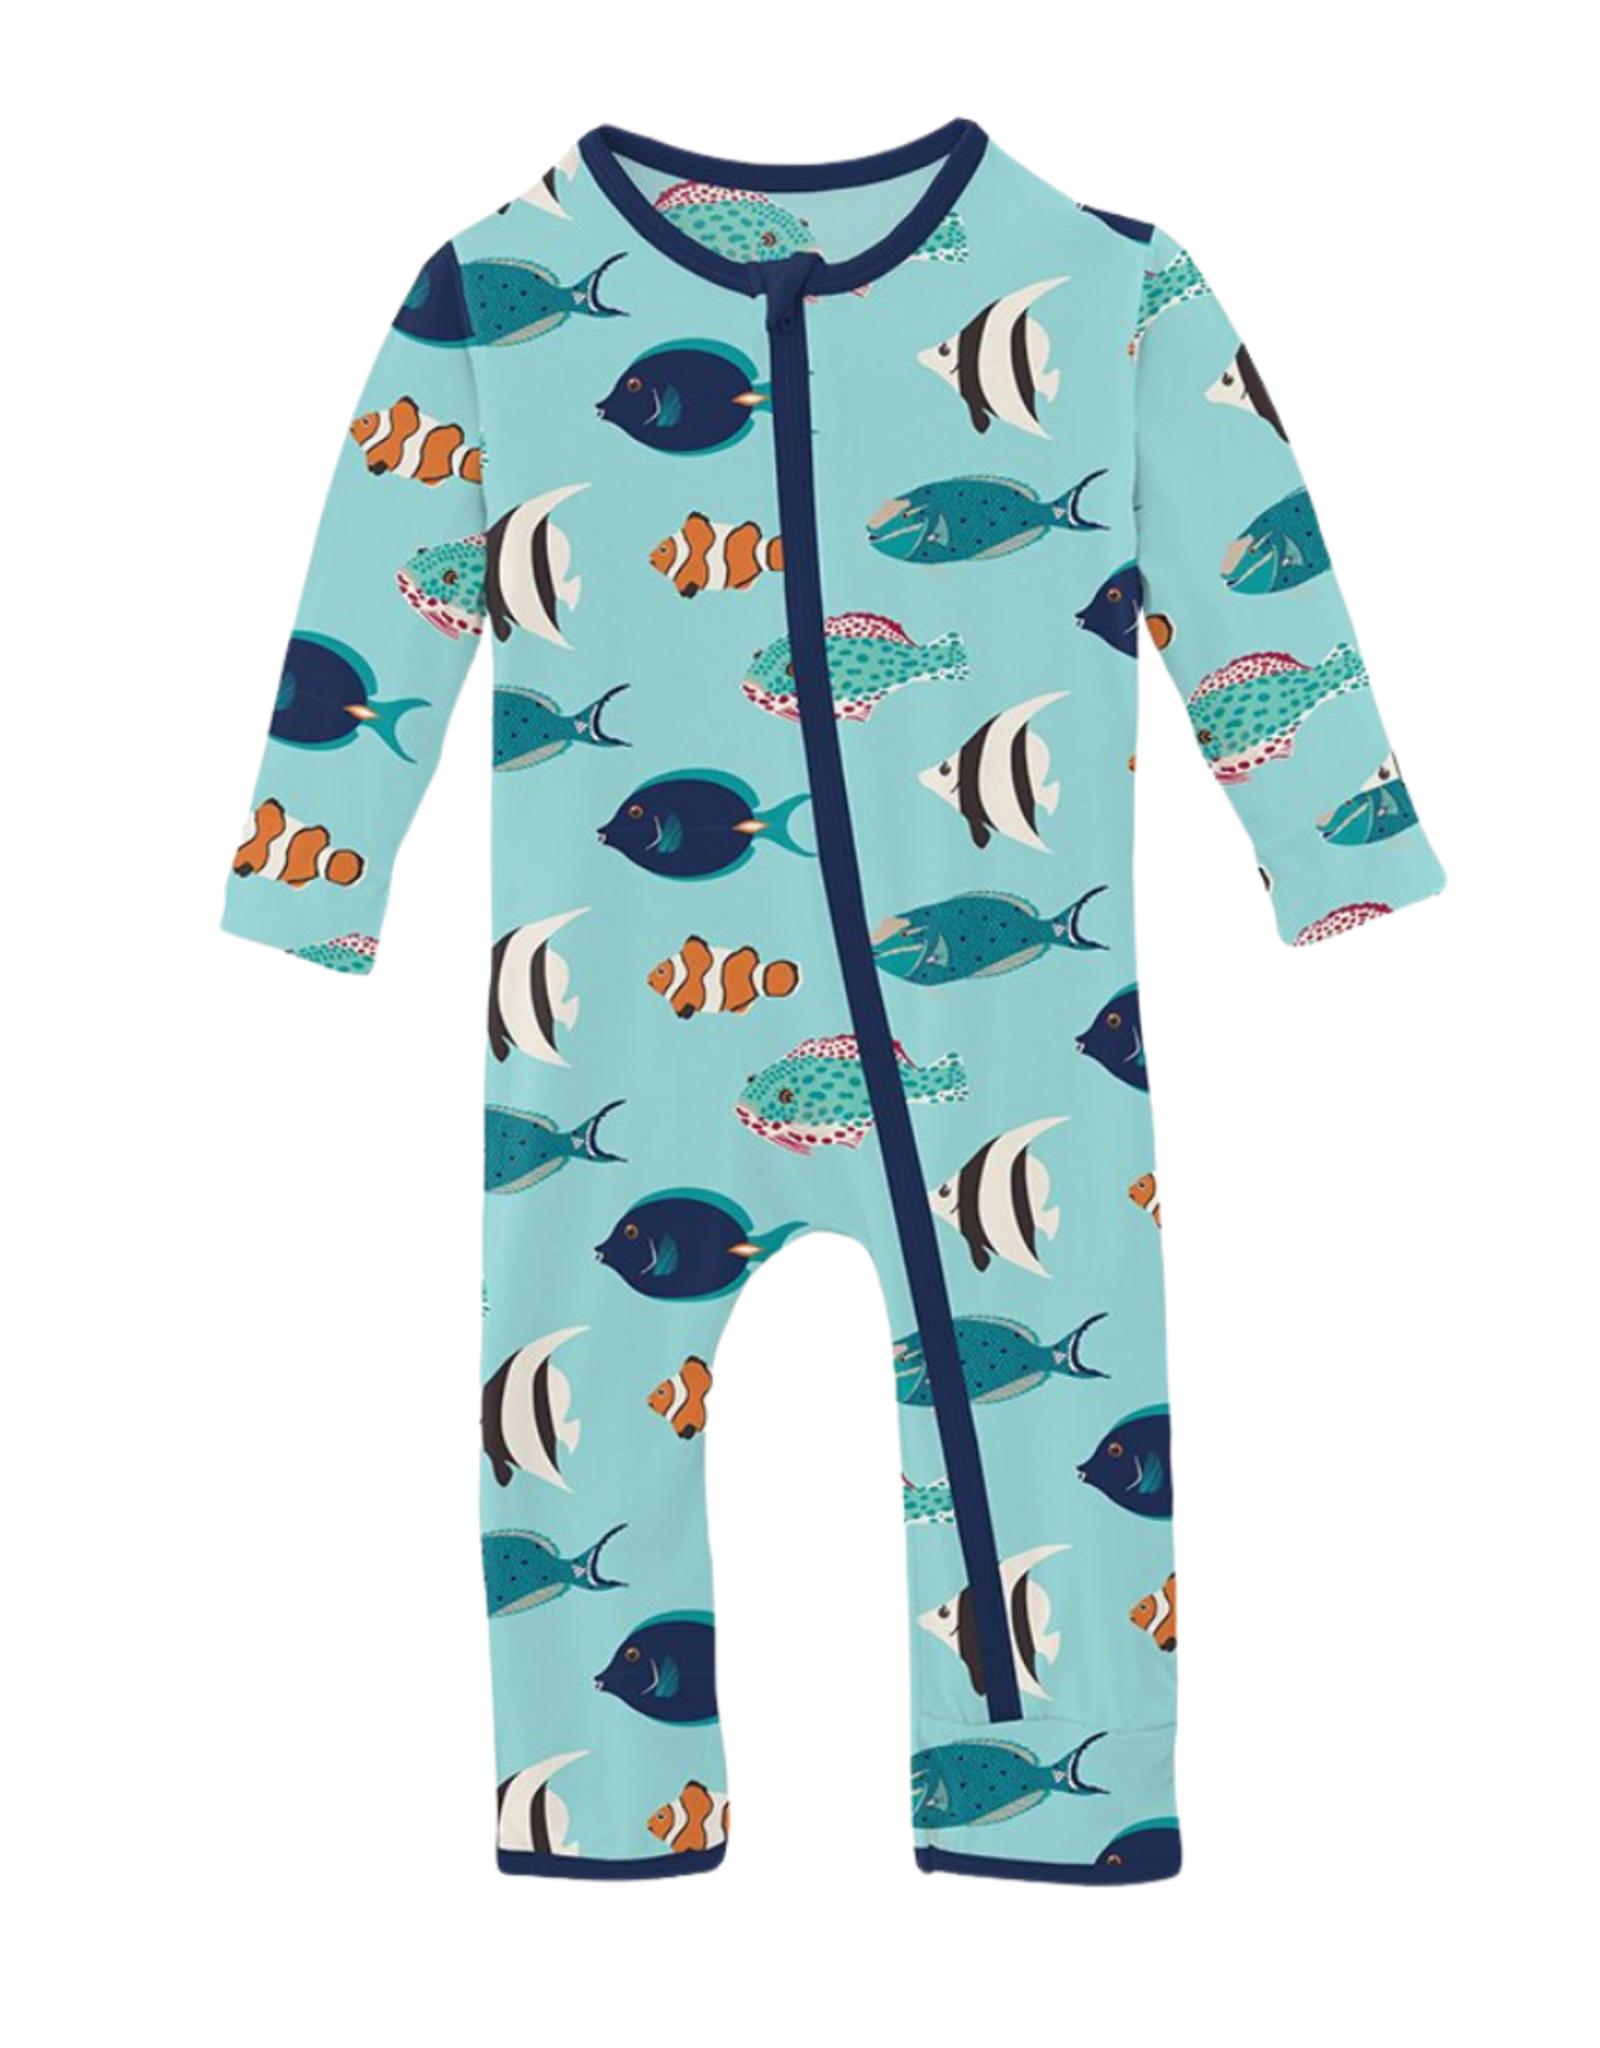 Kickee Pants Print Coverall with Zipper, Tropical Fish